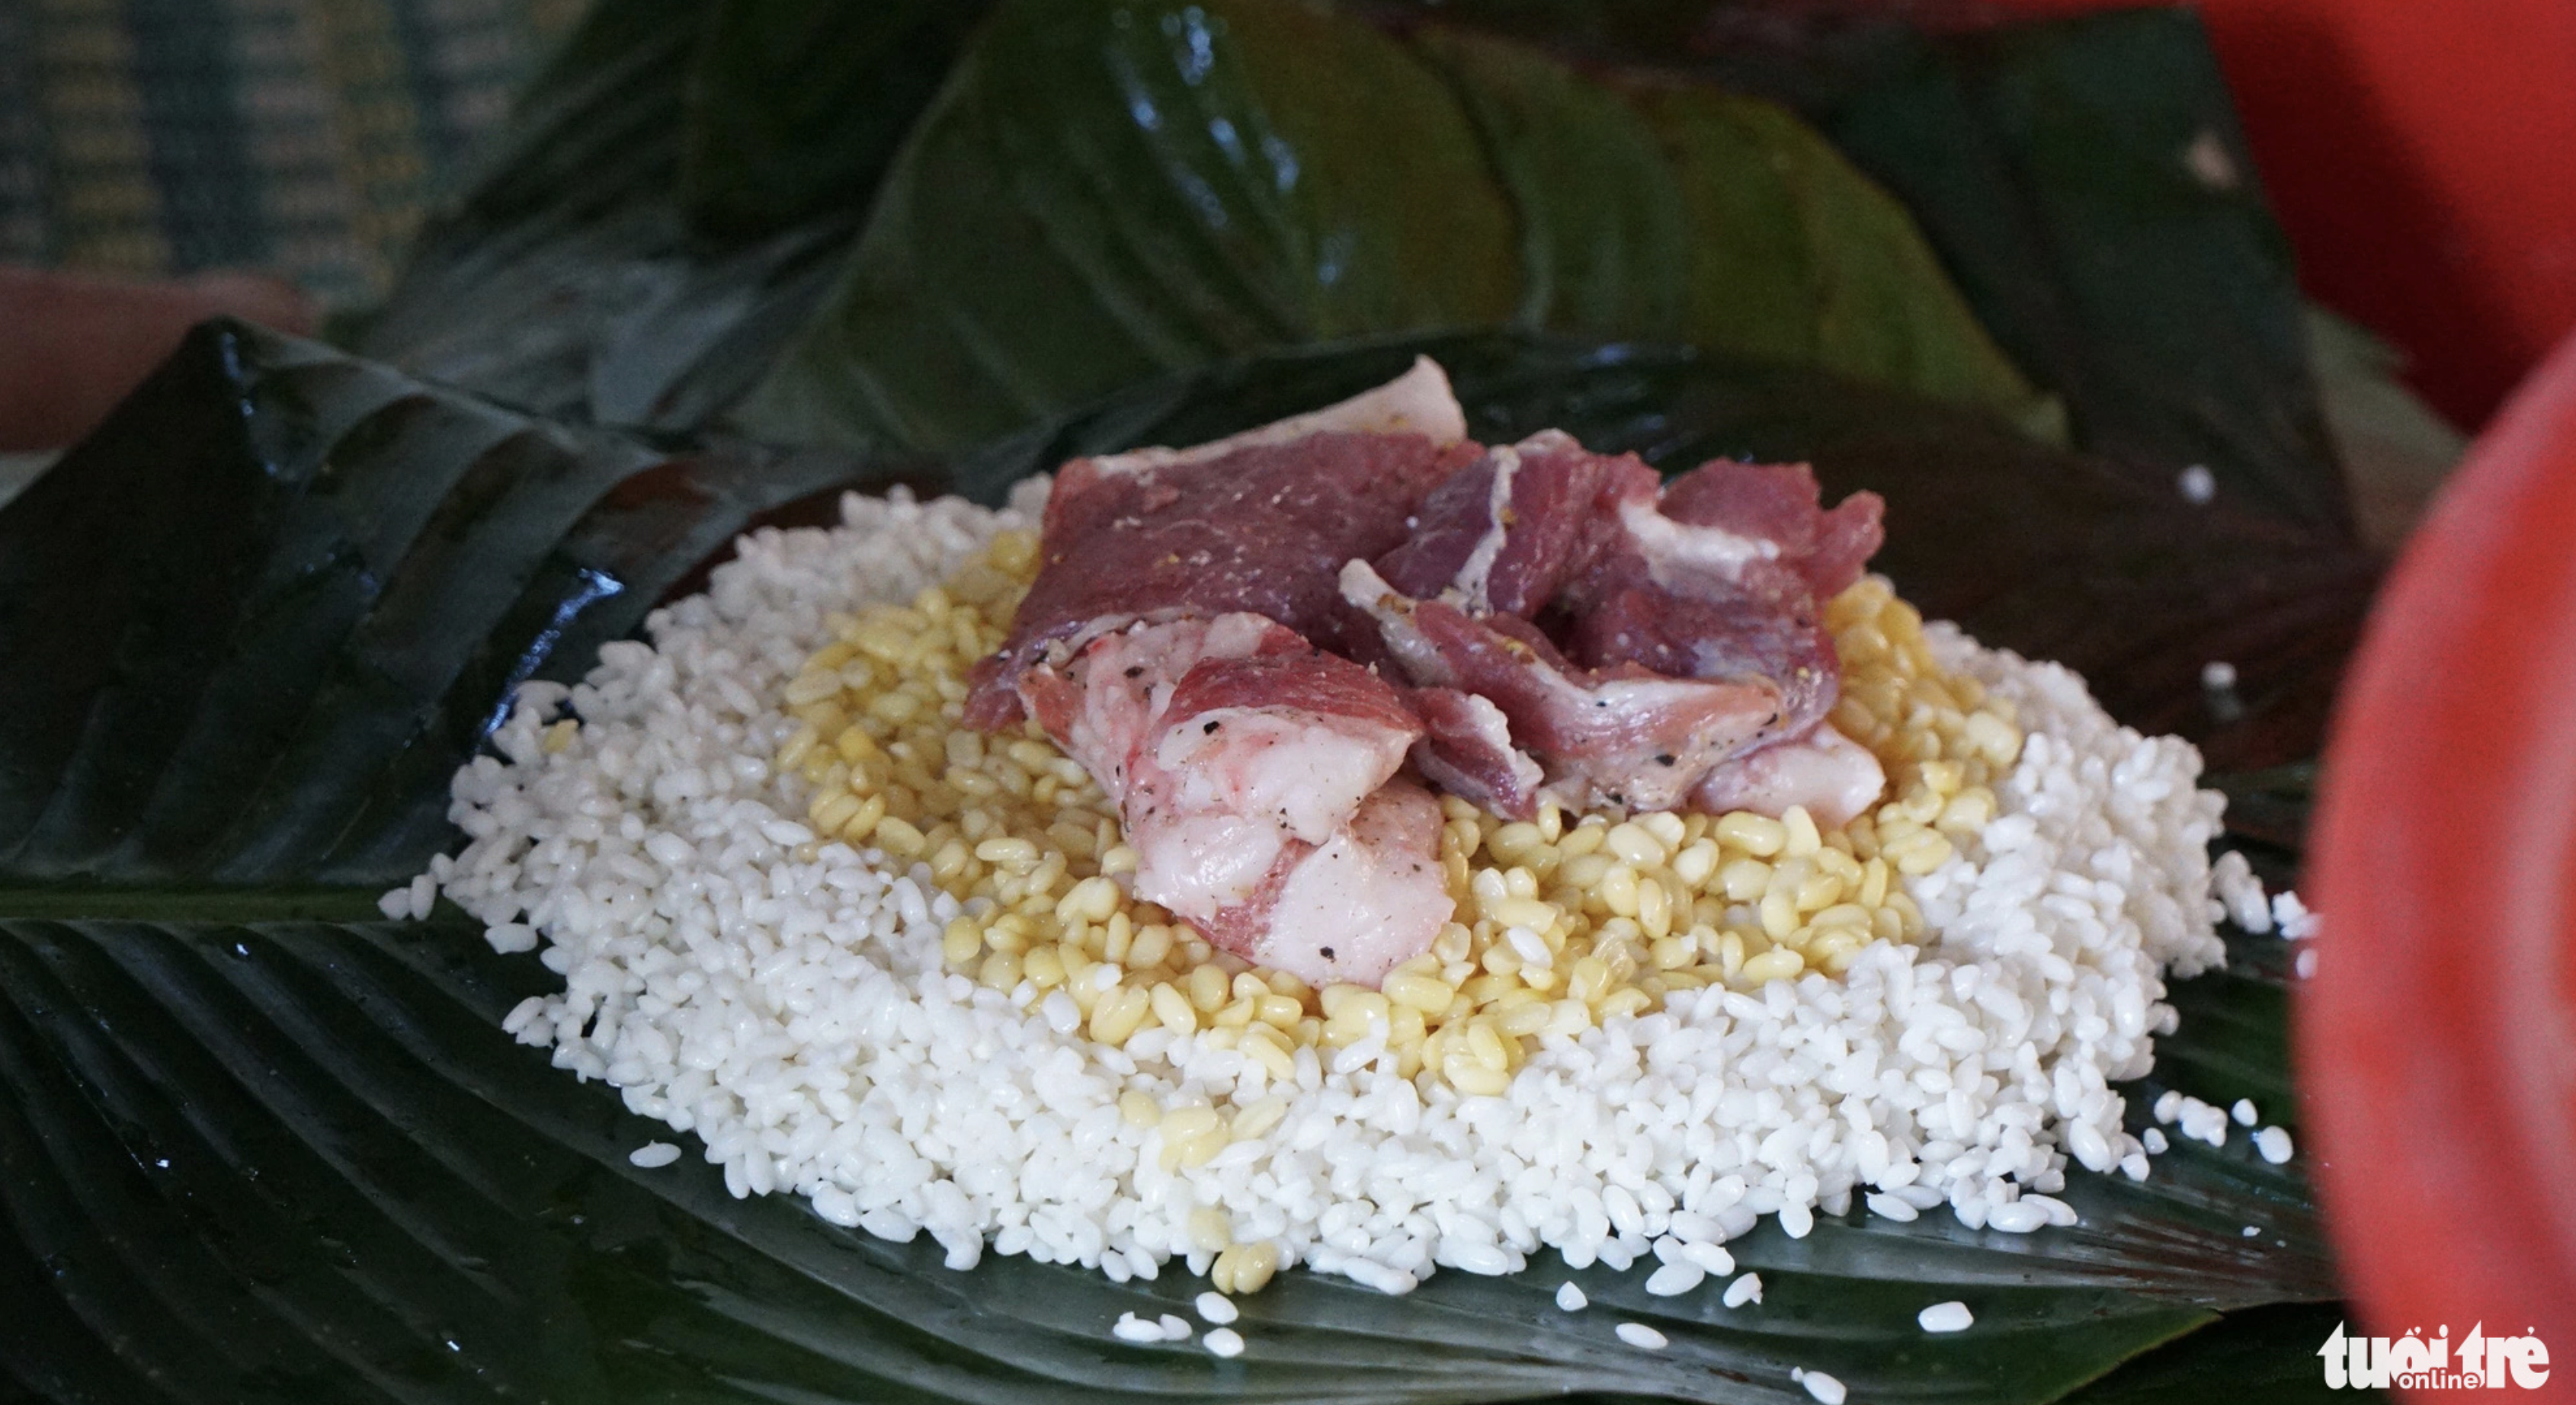 Pork and mung beans are put onto sticky rice to make banh chung. Photo: Tuoi Tre